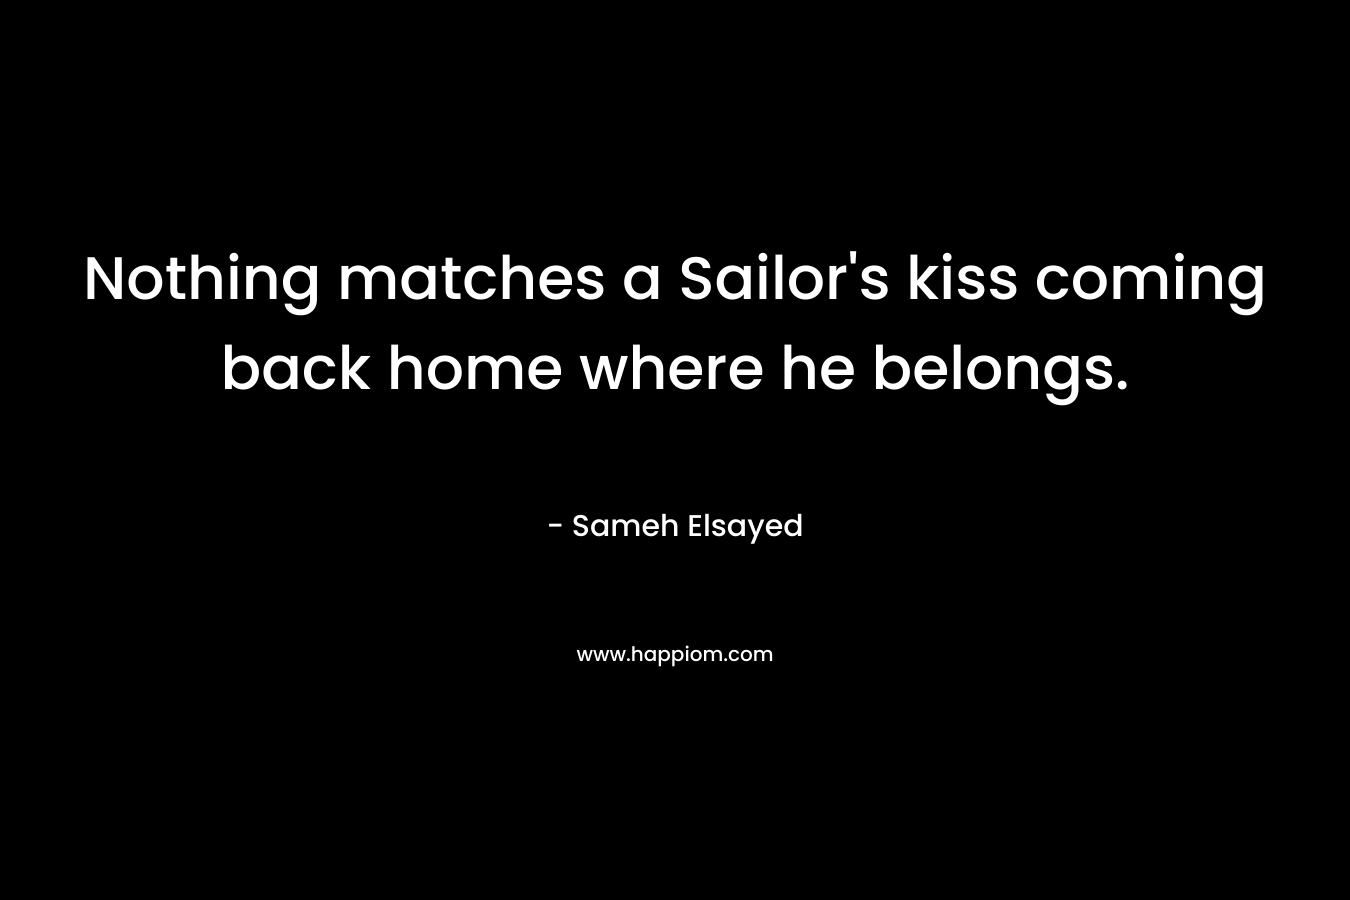 Nothing matches a Sailor’s kiss coming back home where he belongs. – Sameh Elsayed